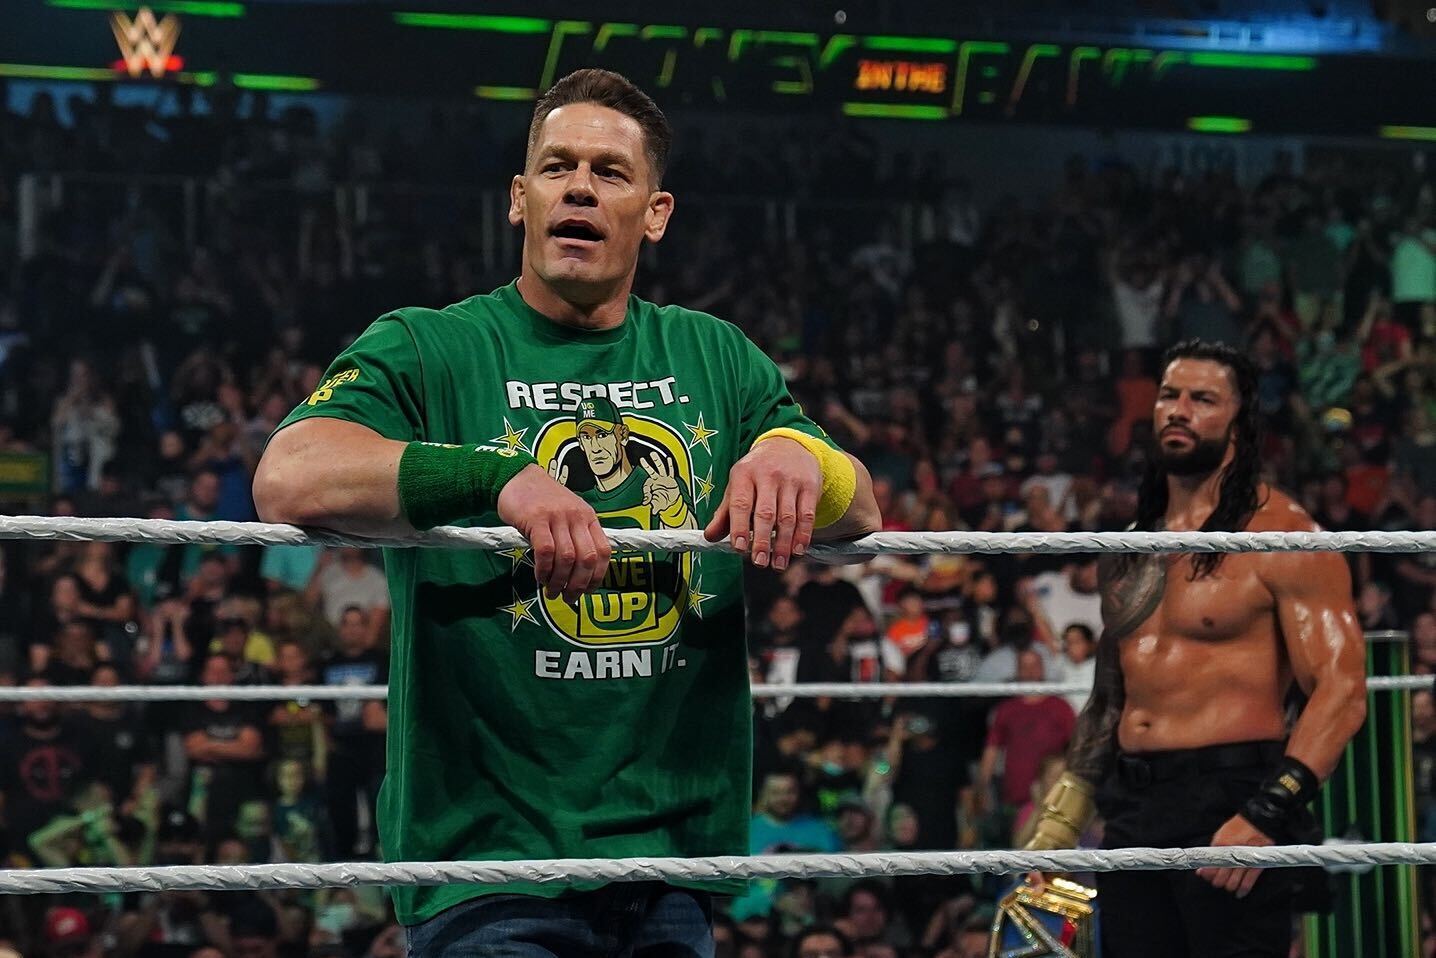 Quick Takes: John Cena Returns, Punk and Bryan in AEW, Moxley's ...